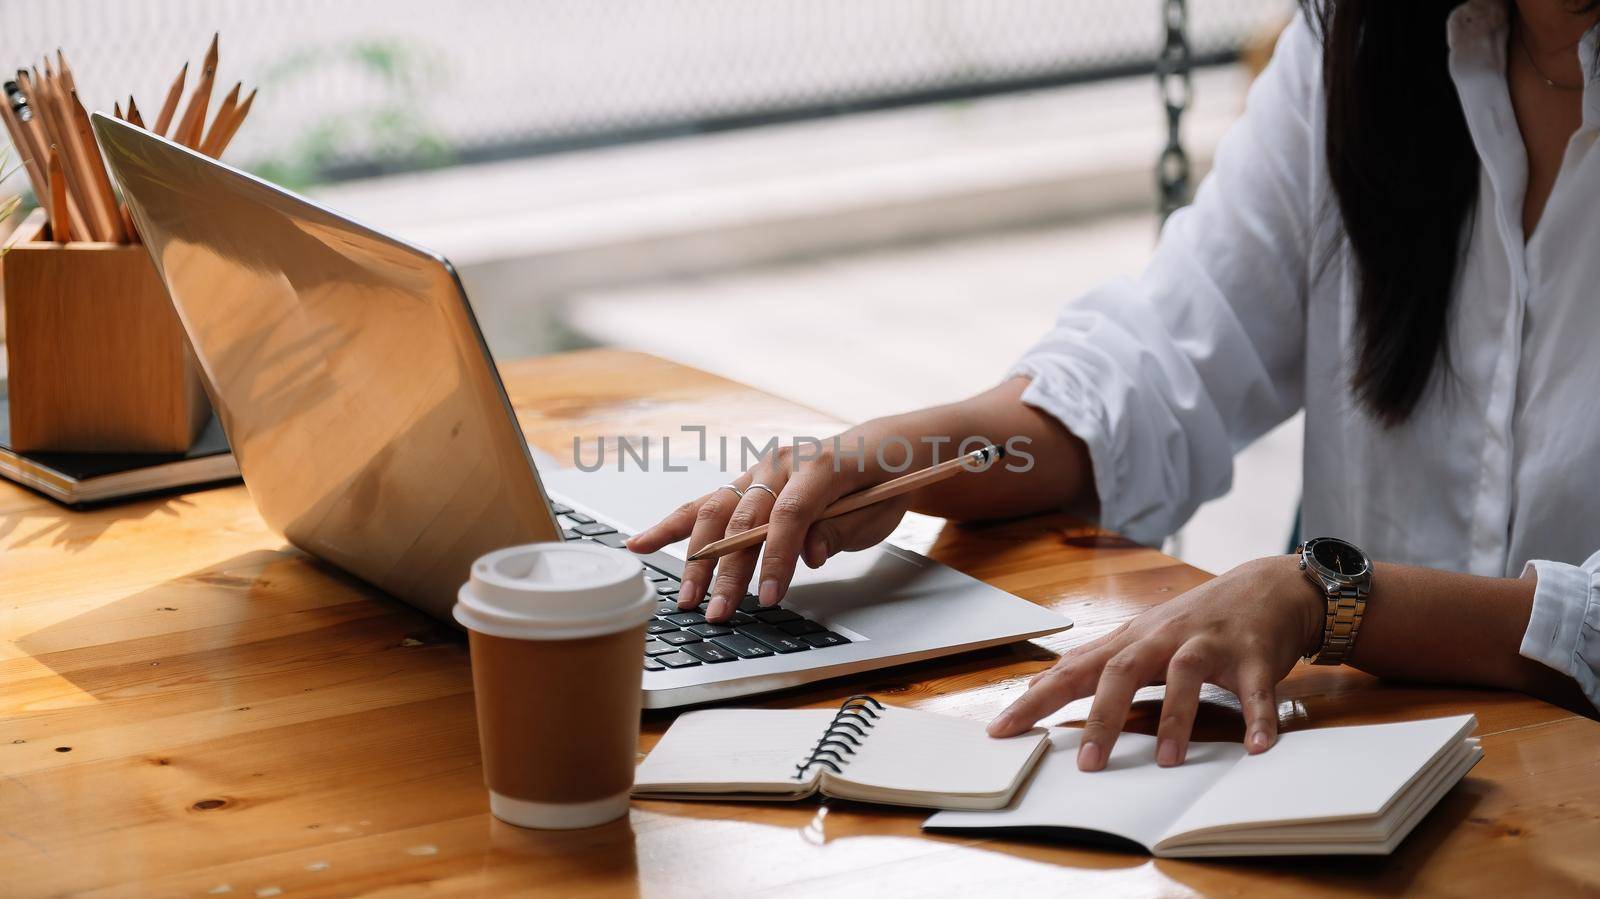 Cropped photo of woman writing making list taking notes in notepad working or learning on laptop indoors- educational course or training, seminar, education online concept